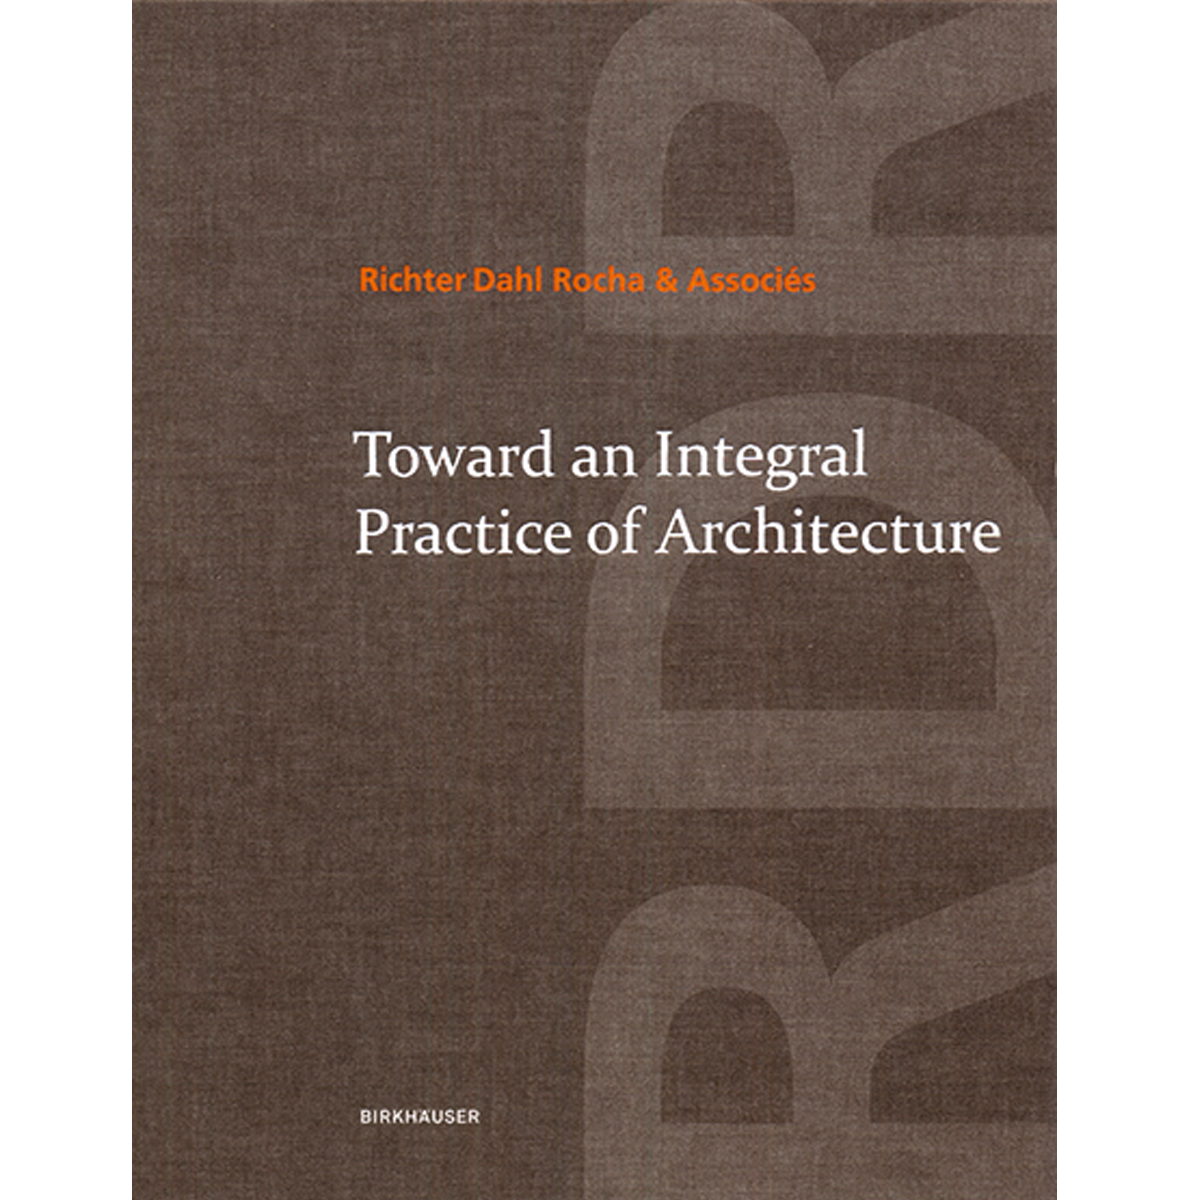 Toward an Integral Practice of Architecture